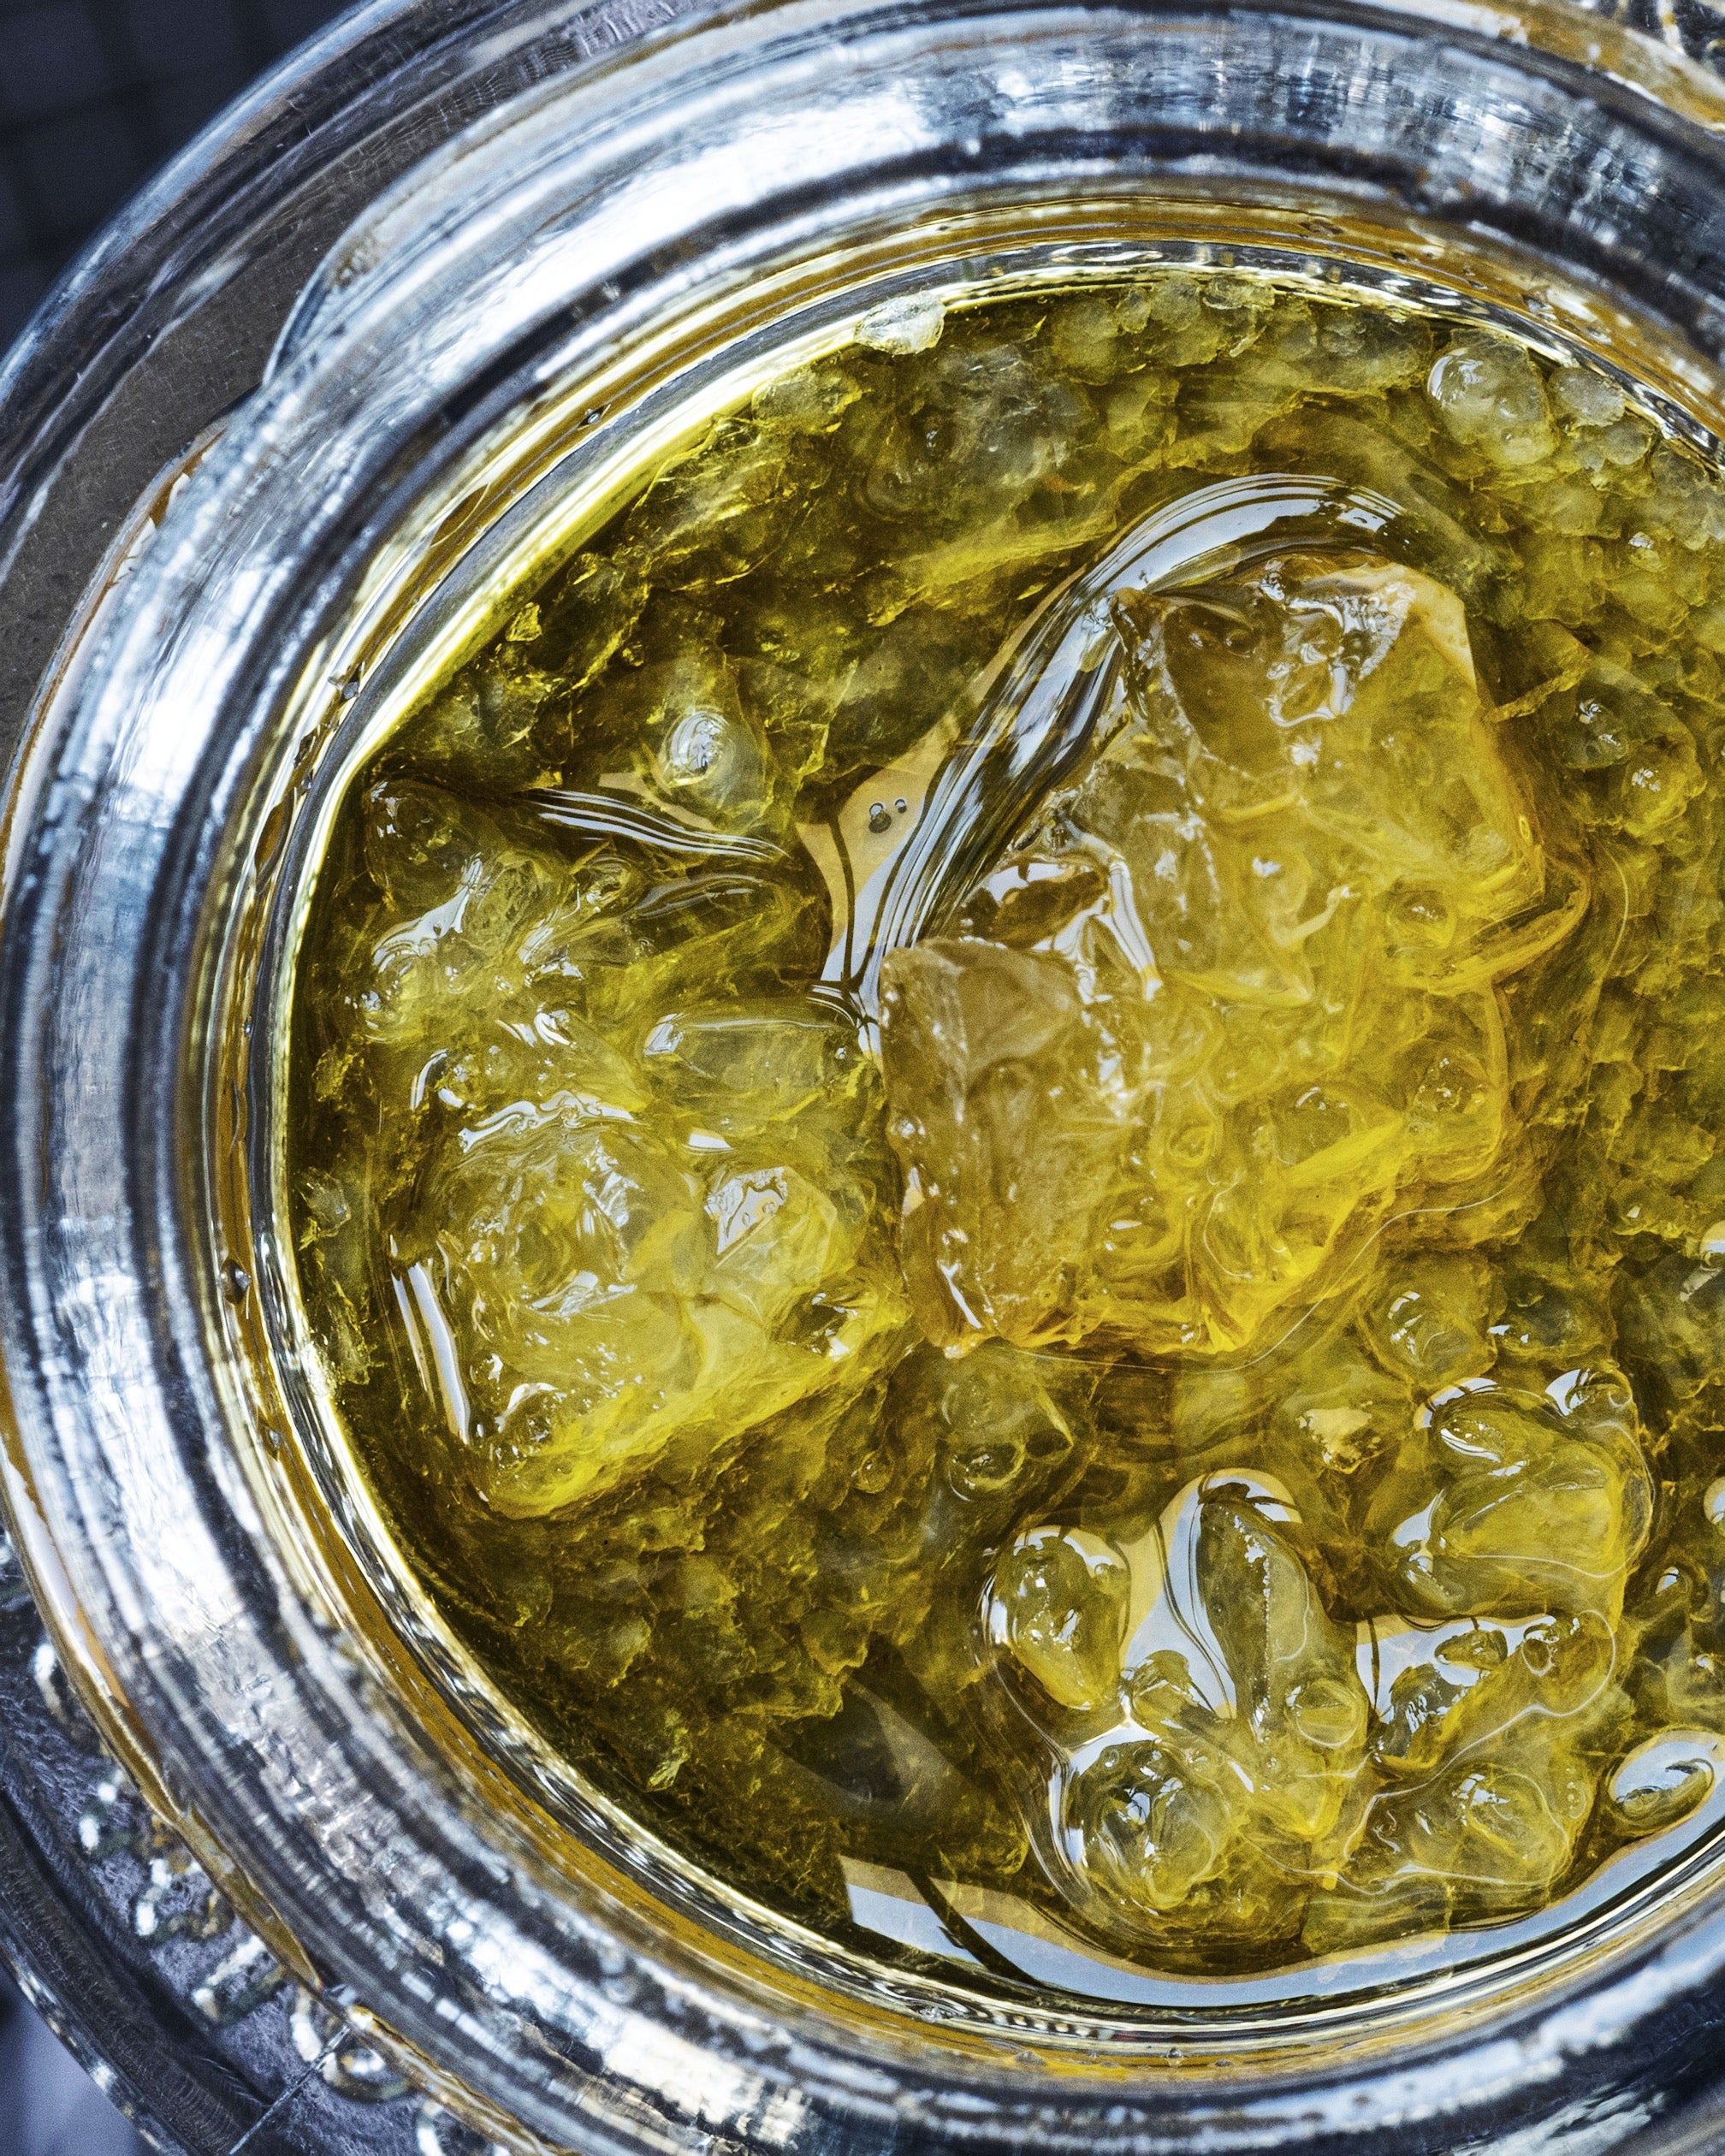 Live resin diamonds in a glass jar are cannabis concentrates ready for dabbing.